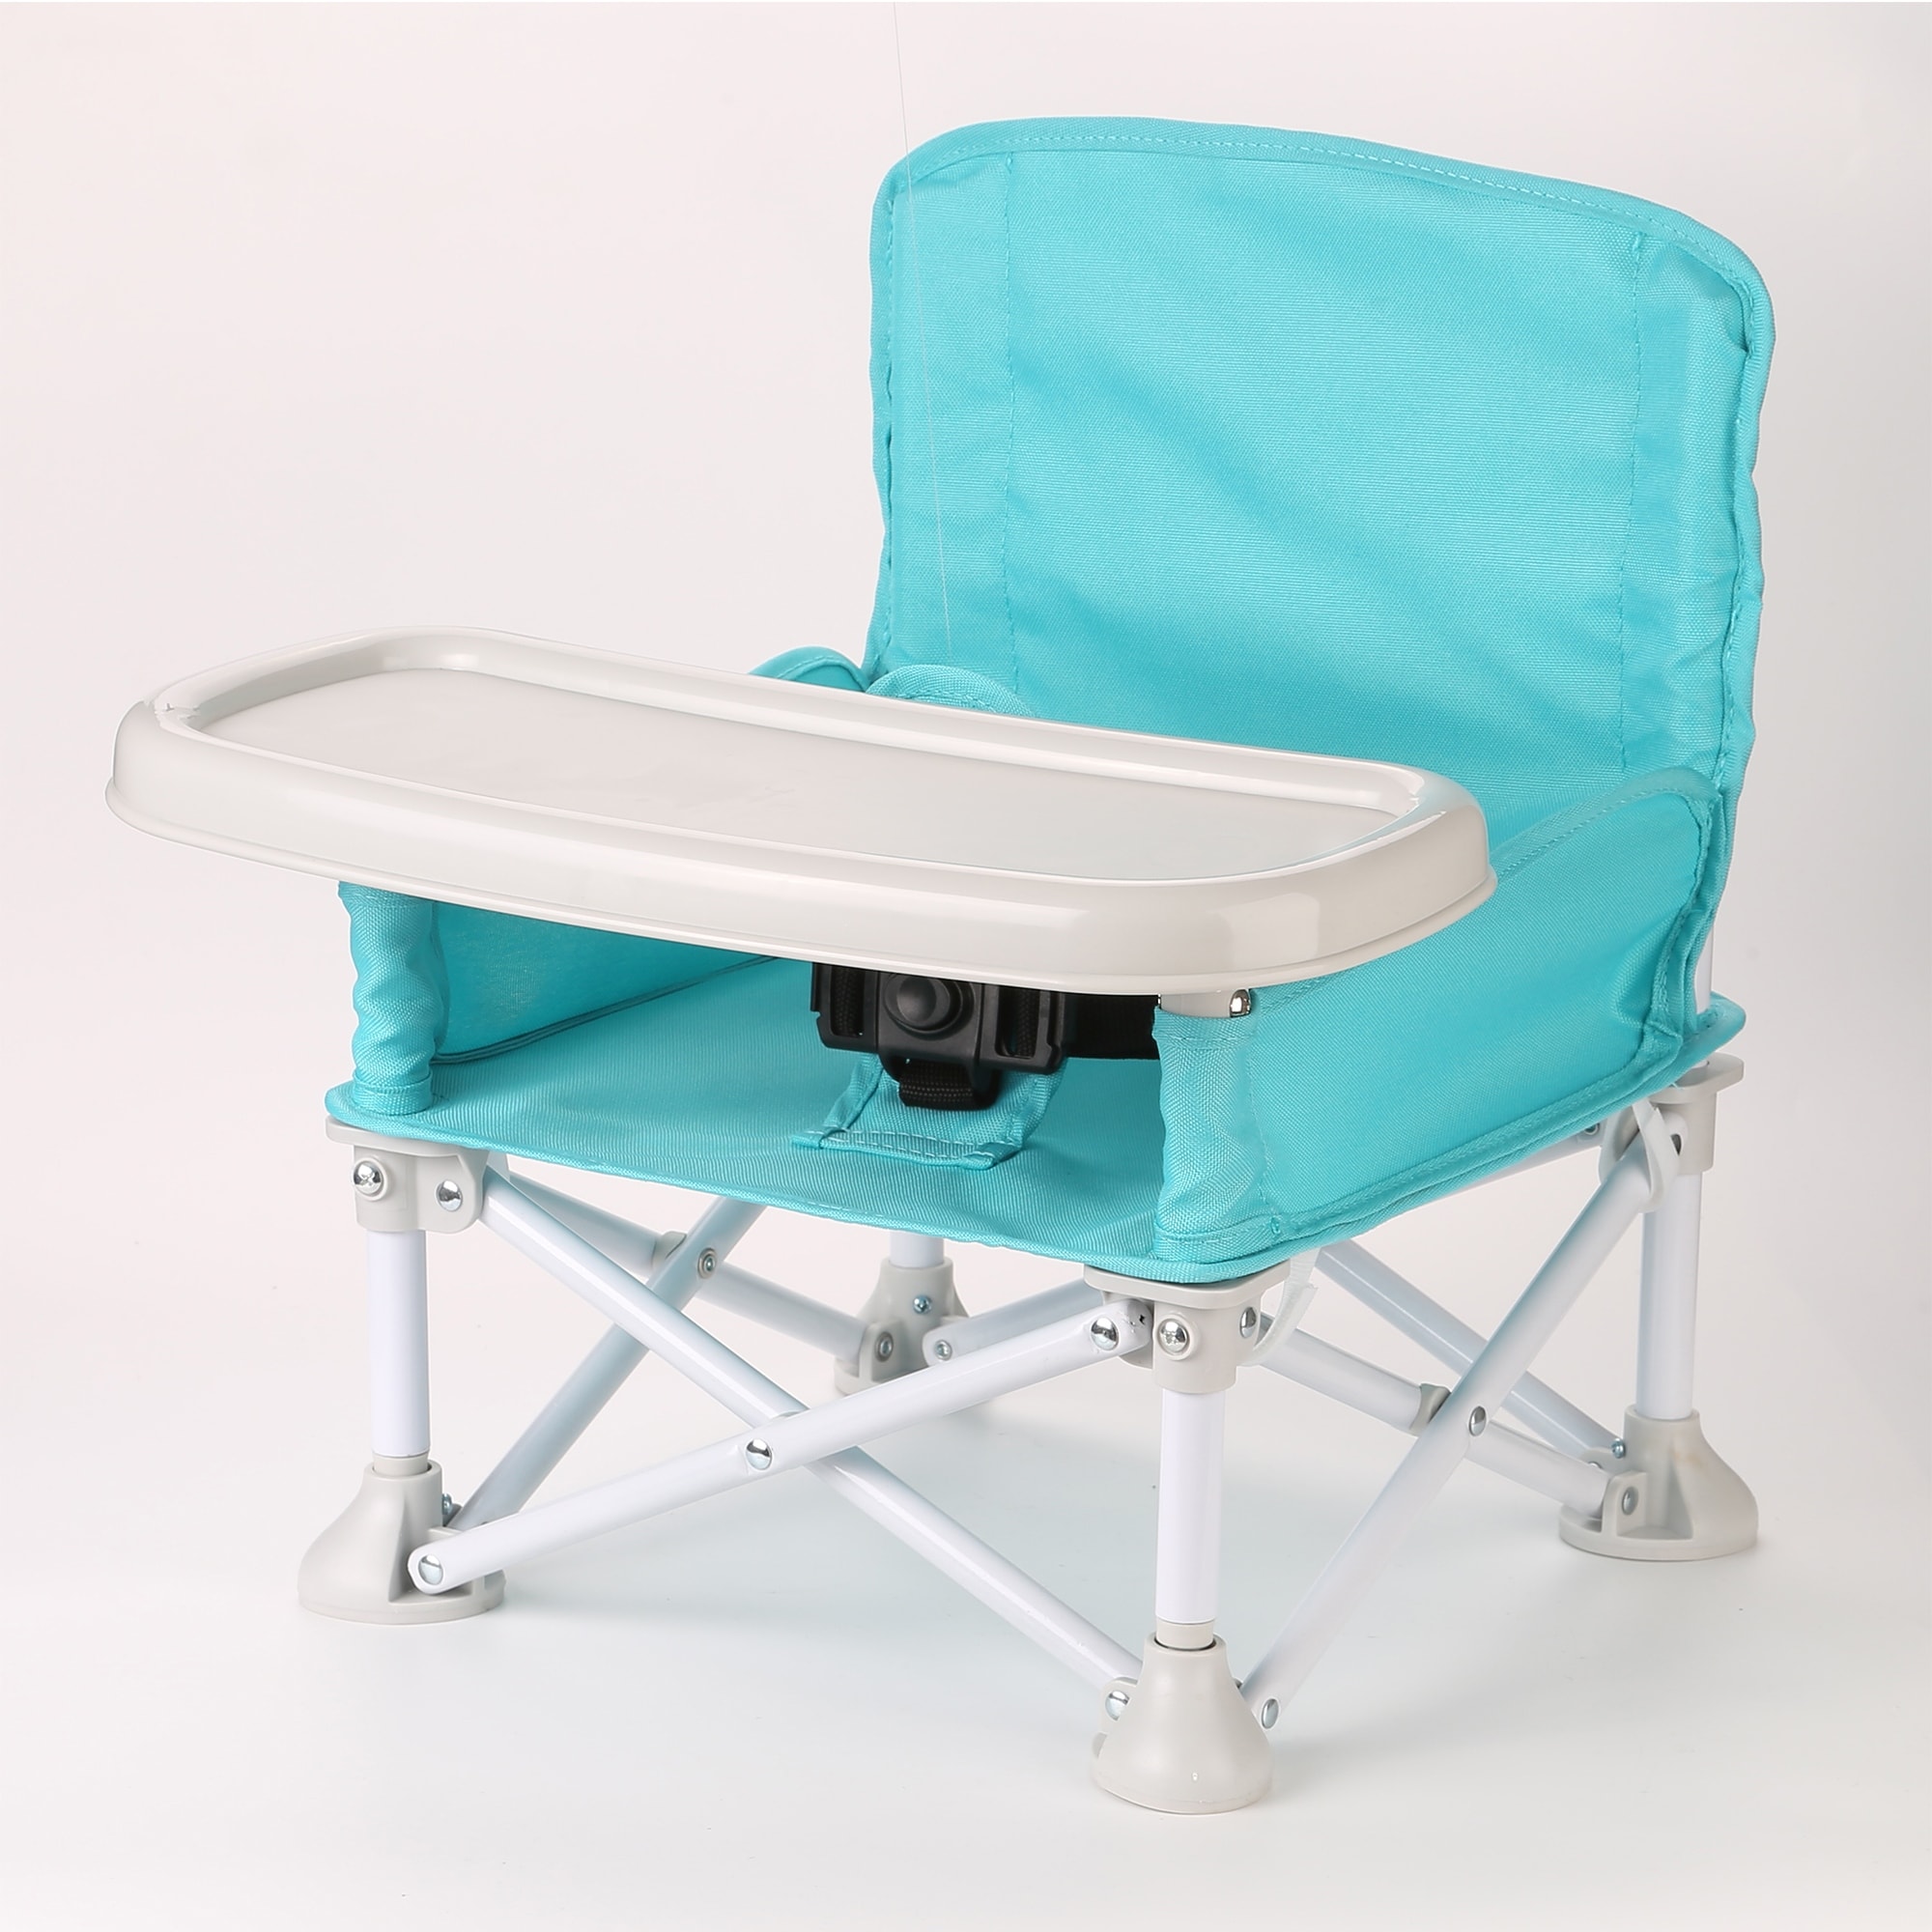 Shop Image Booster Seat With Tray Folding Portable High Chair Tip Free Design Straps To Kitchen Chairs For Baby Travel Eating Overstock 31229201